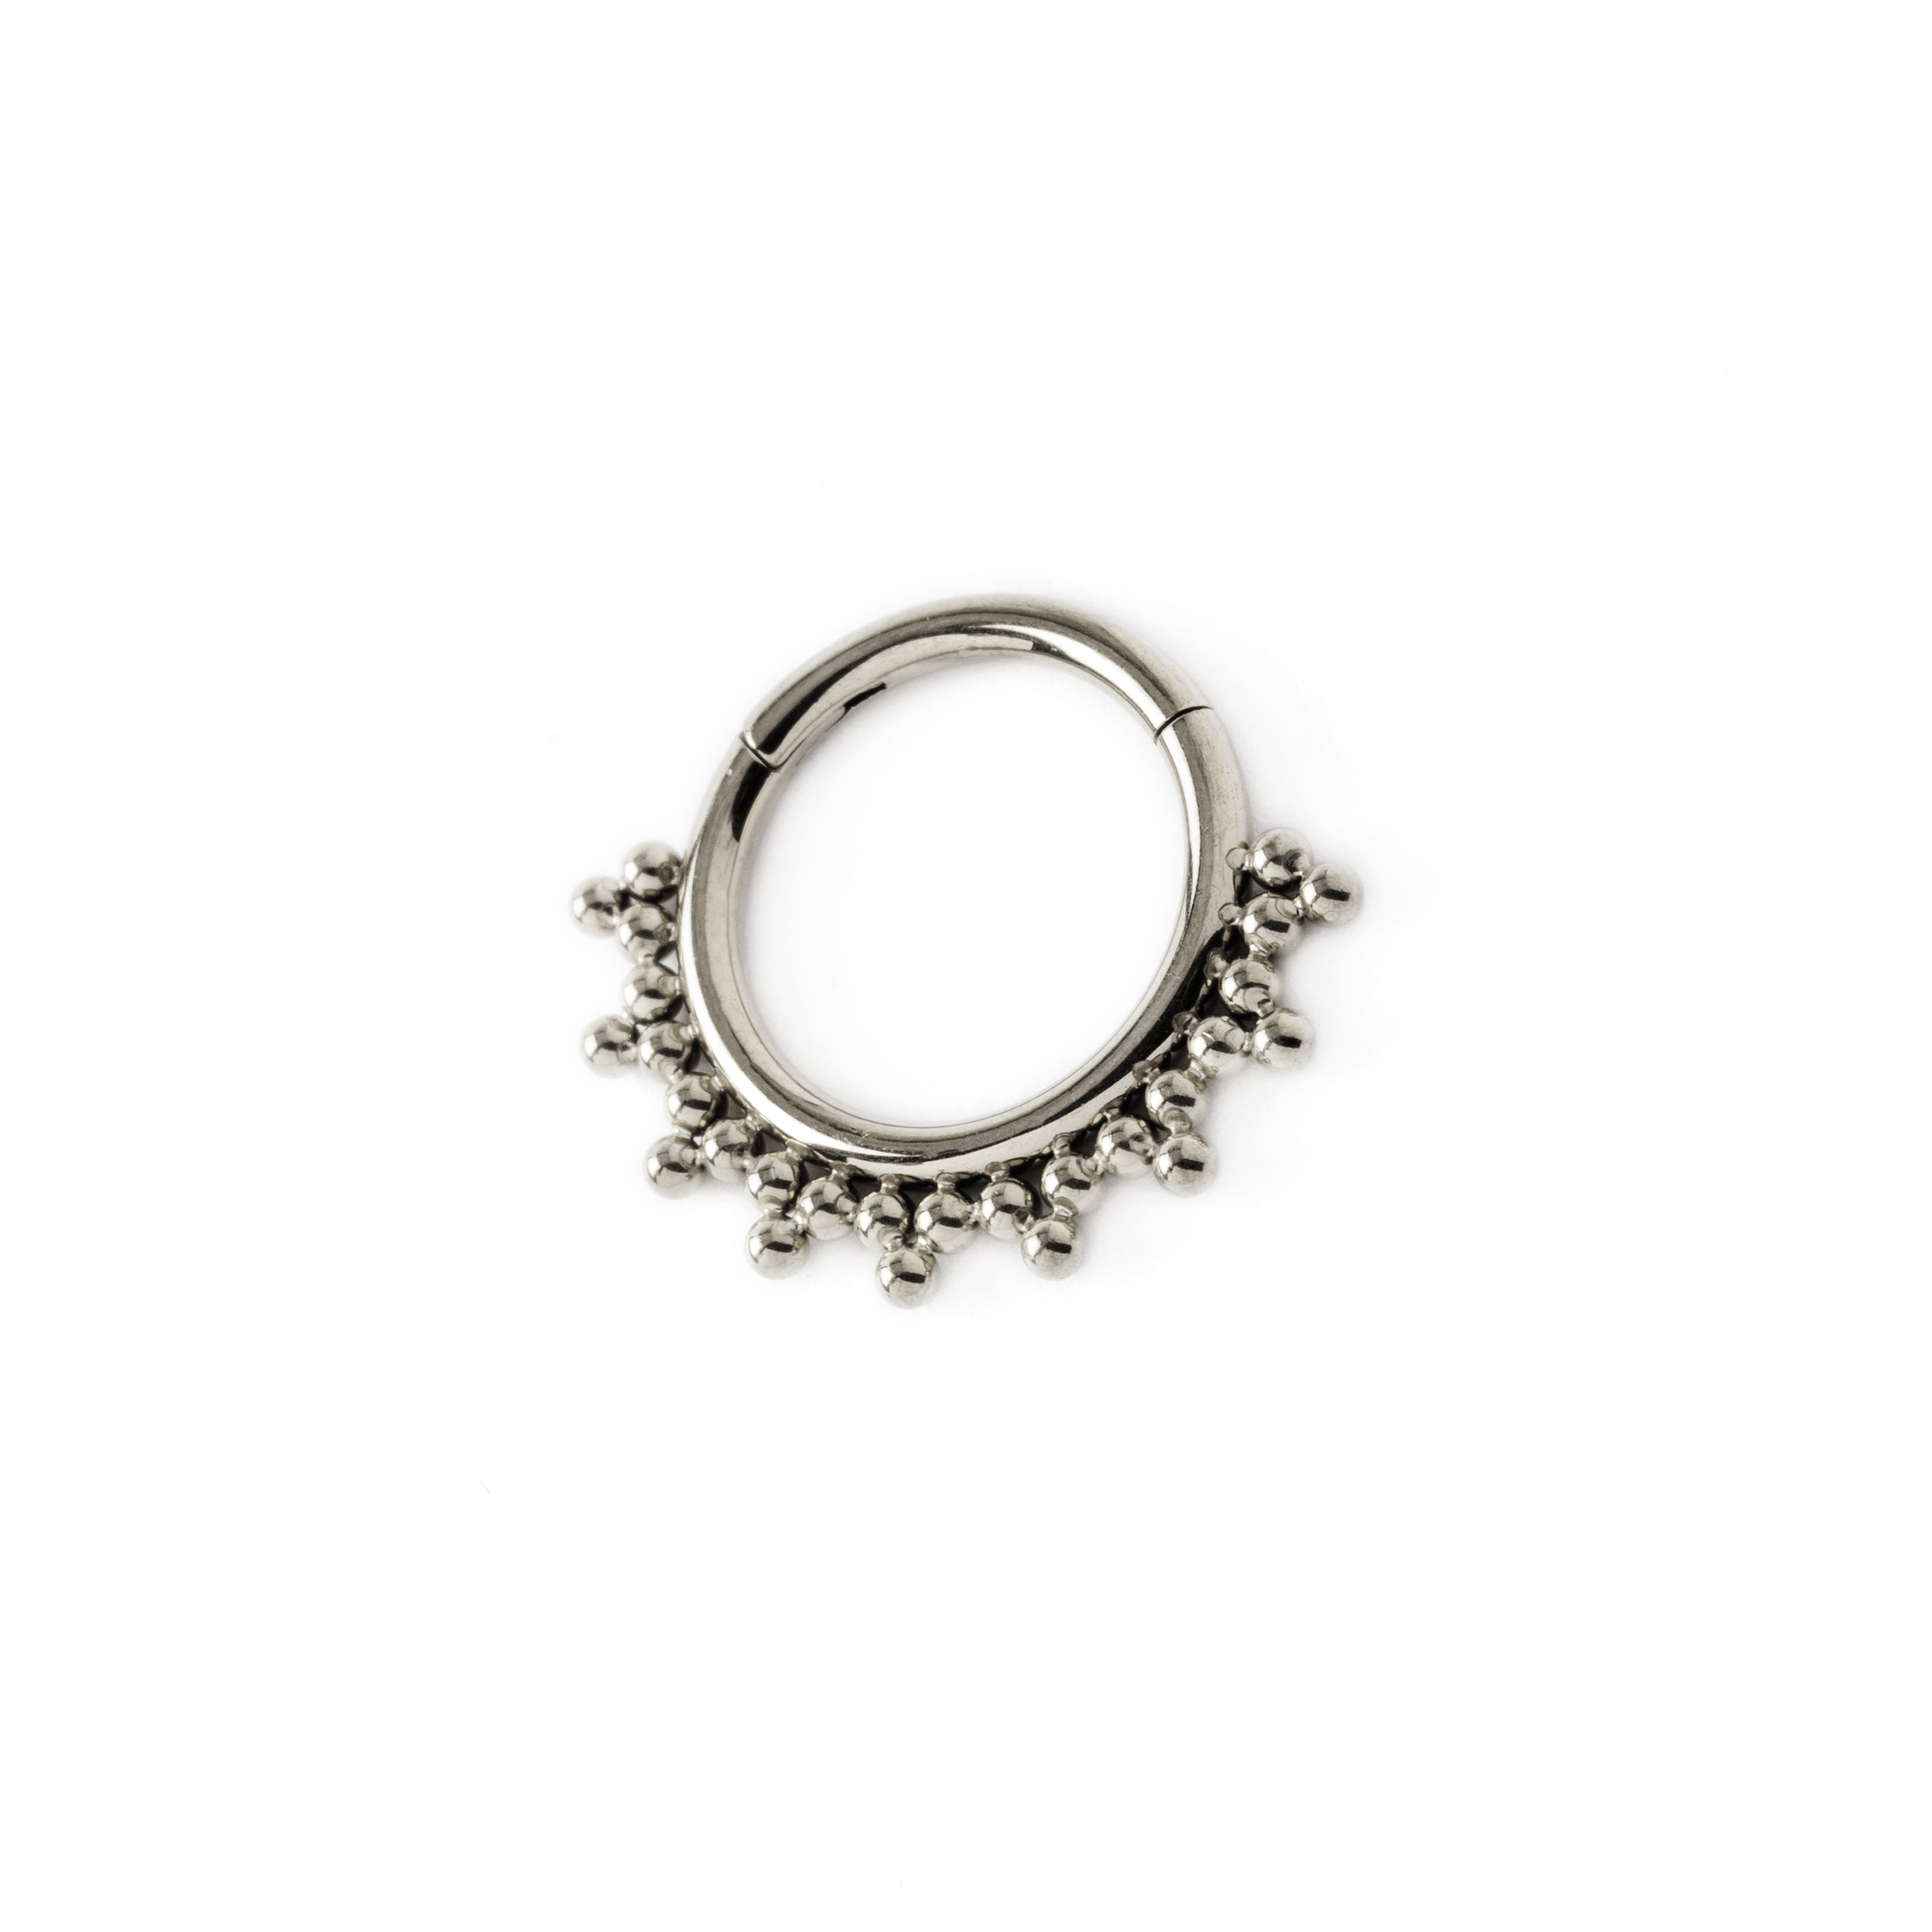 Sarika surgical steel septum clicker left side view